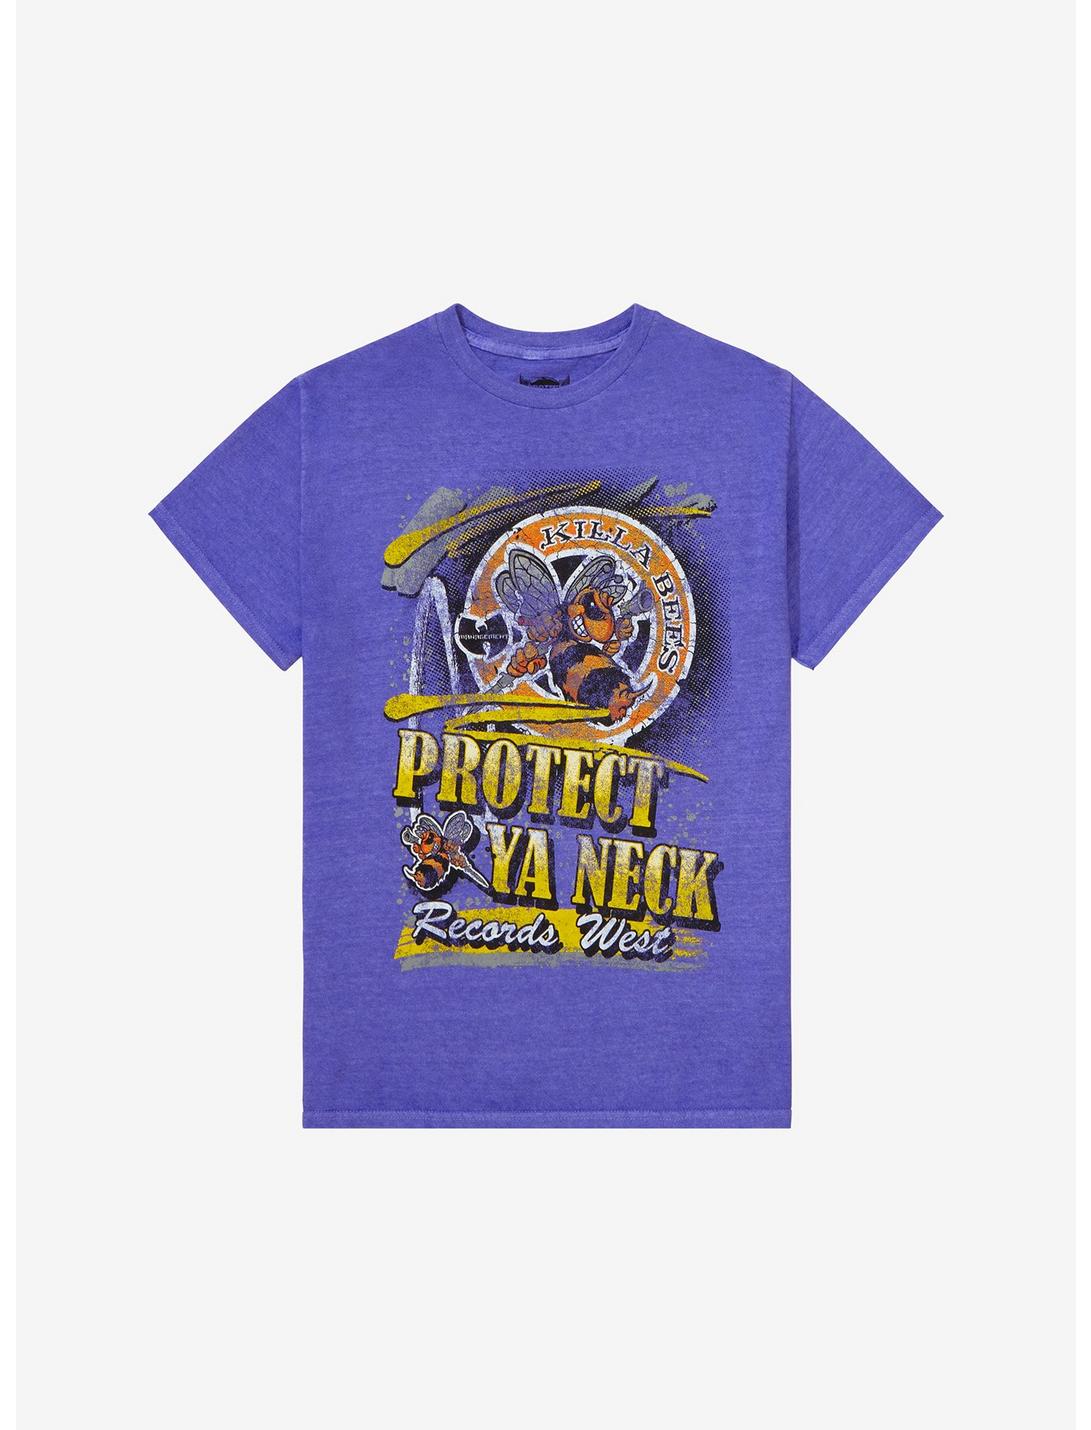 Protect Ya Neck Records Pigment-Dyed T-Shirt, PURPLE, hi-res